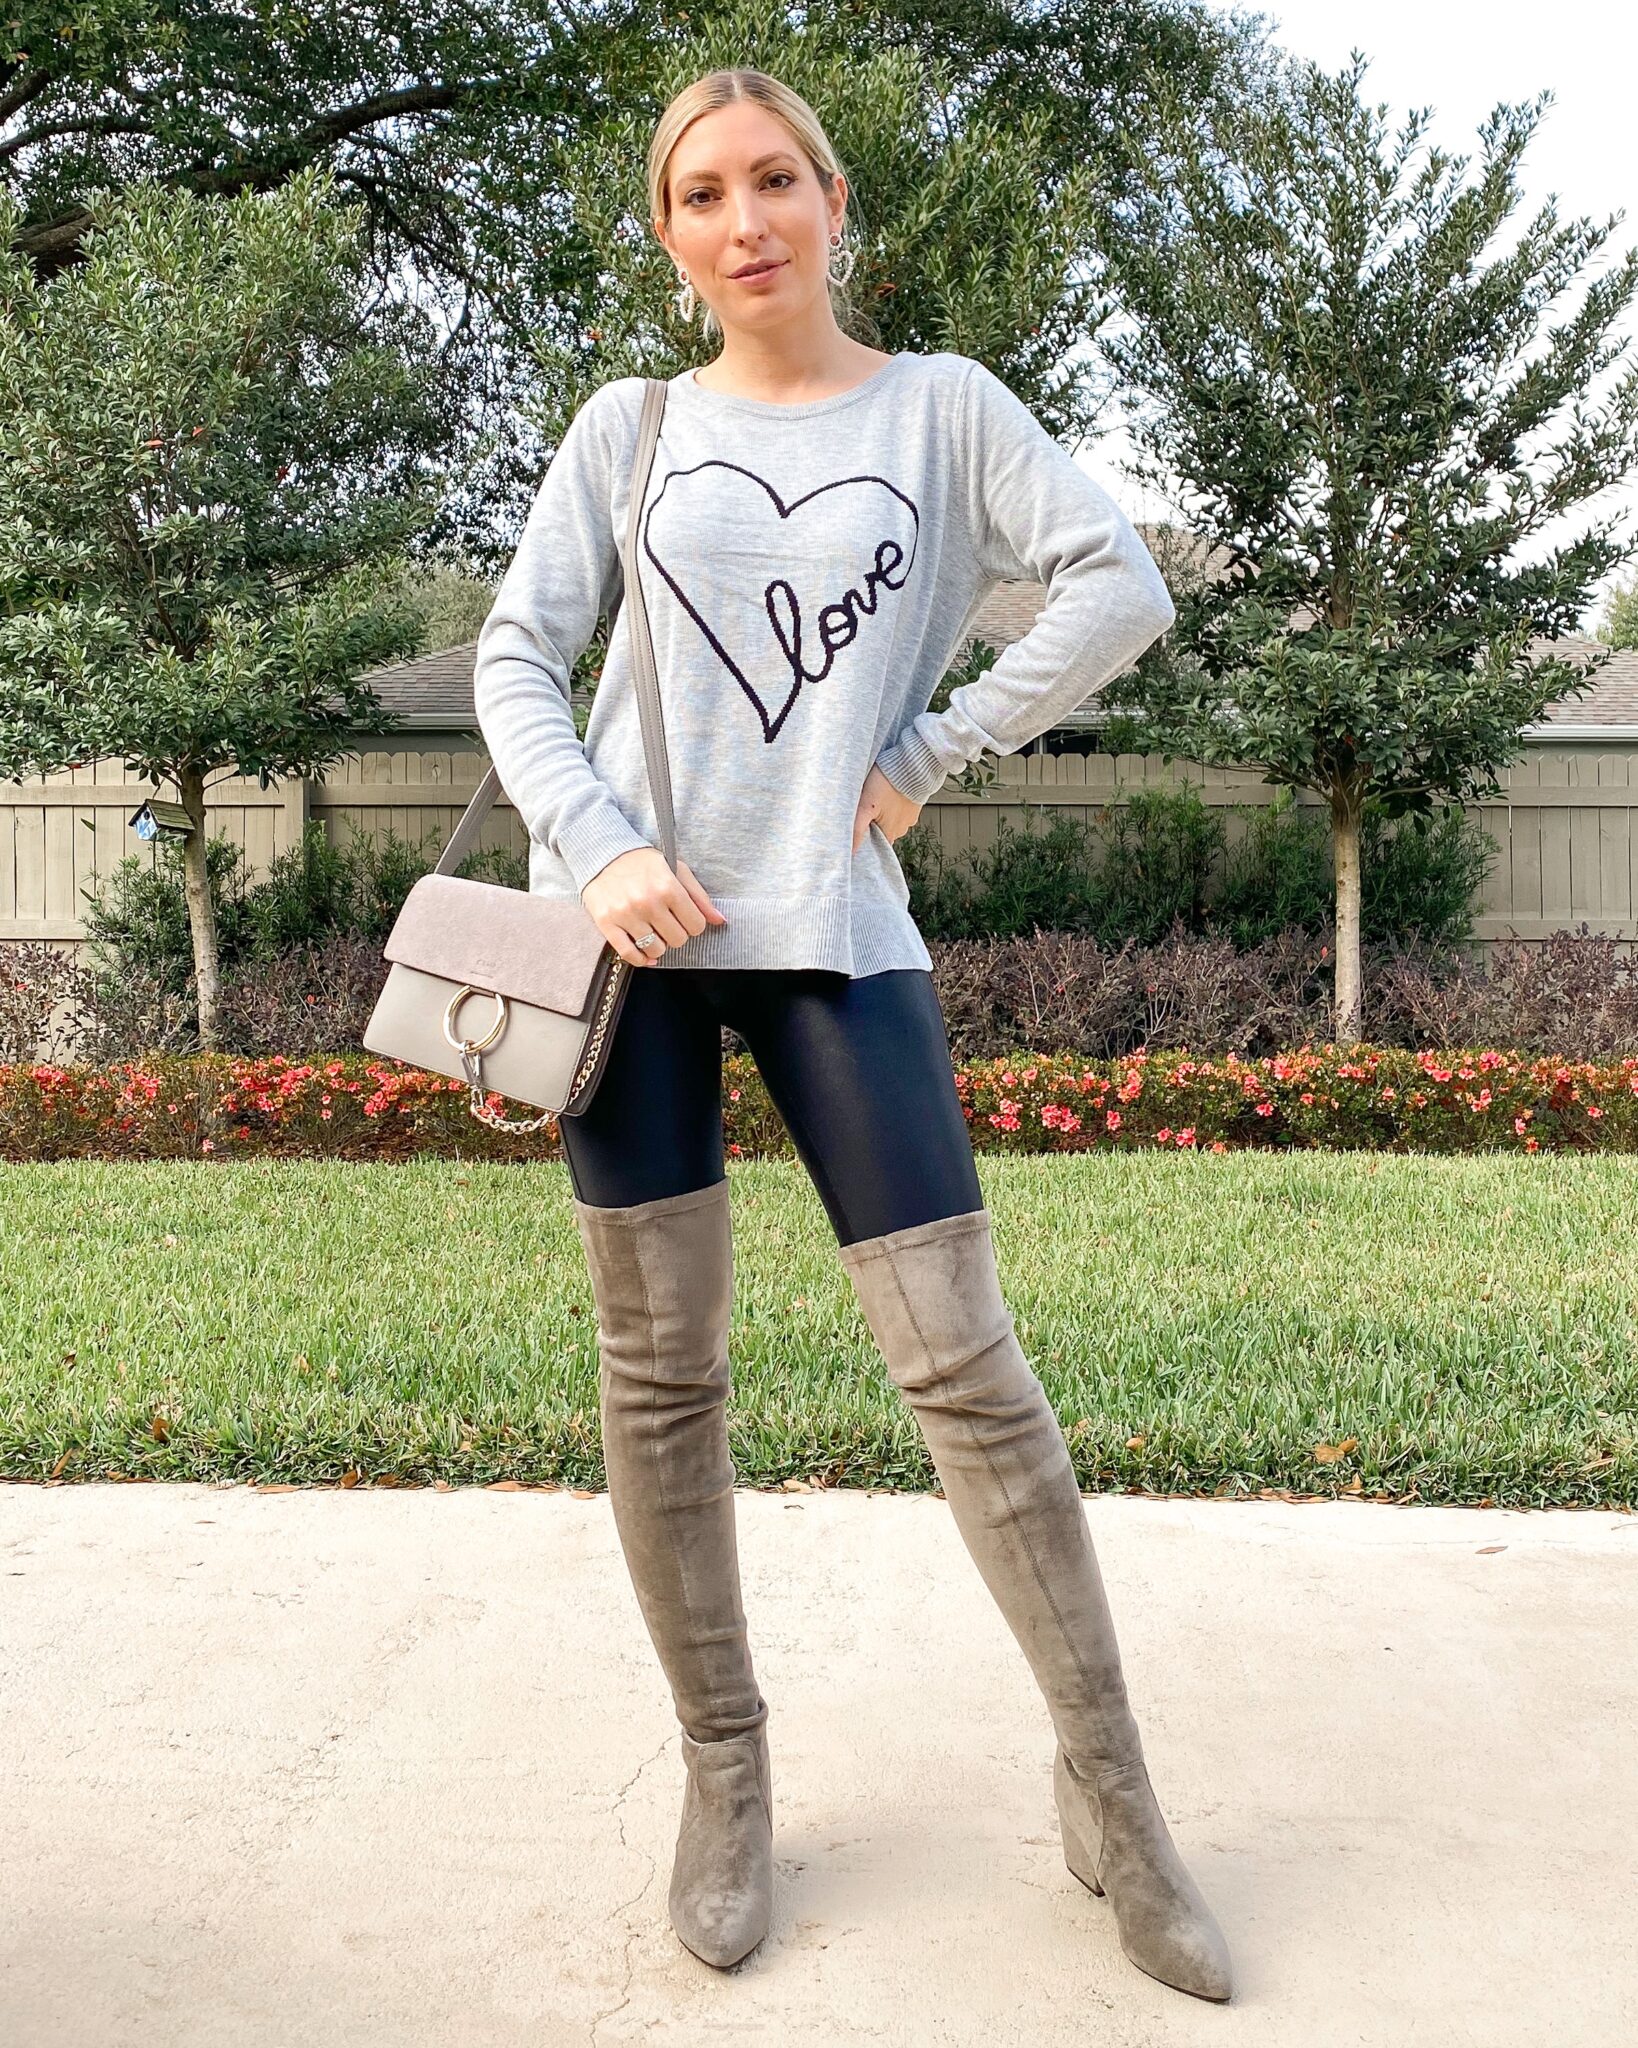 5 WAYS TO STYLE SPANX LEATHER LEGGINGS - The Fashionable Accountant